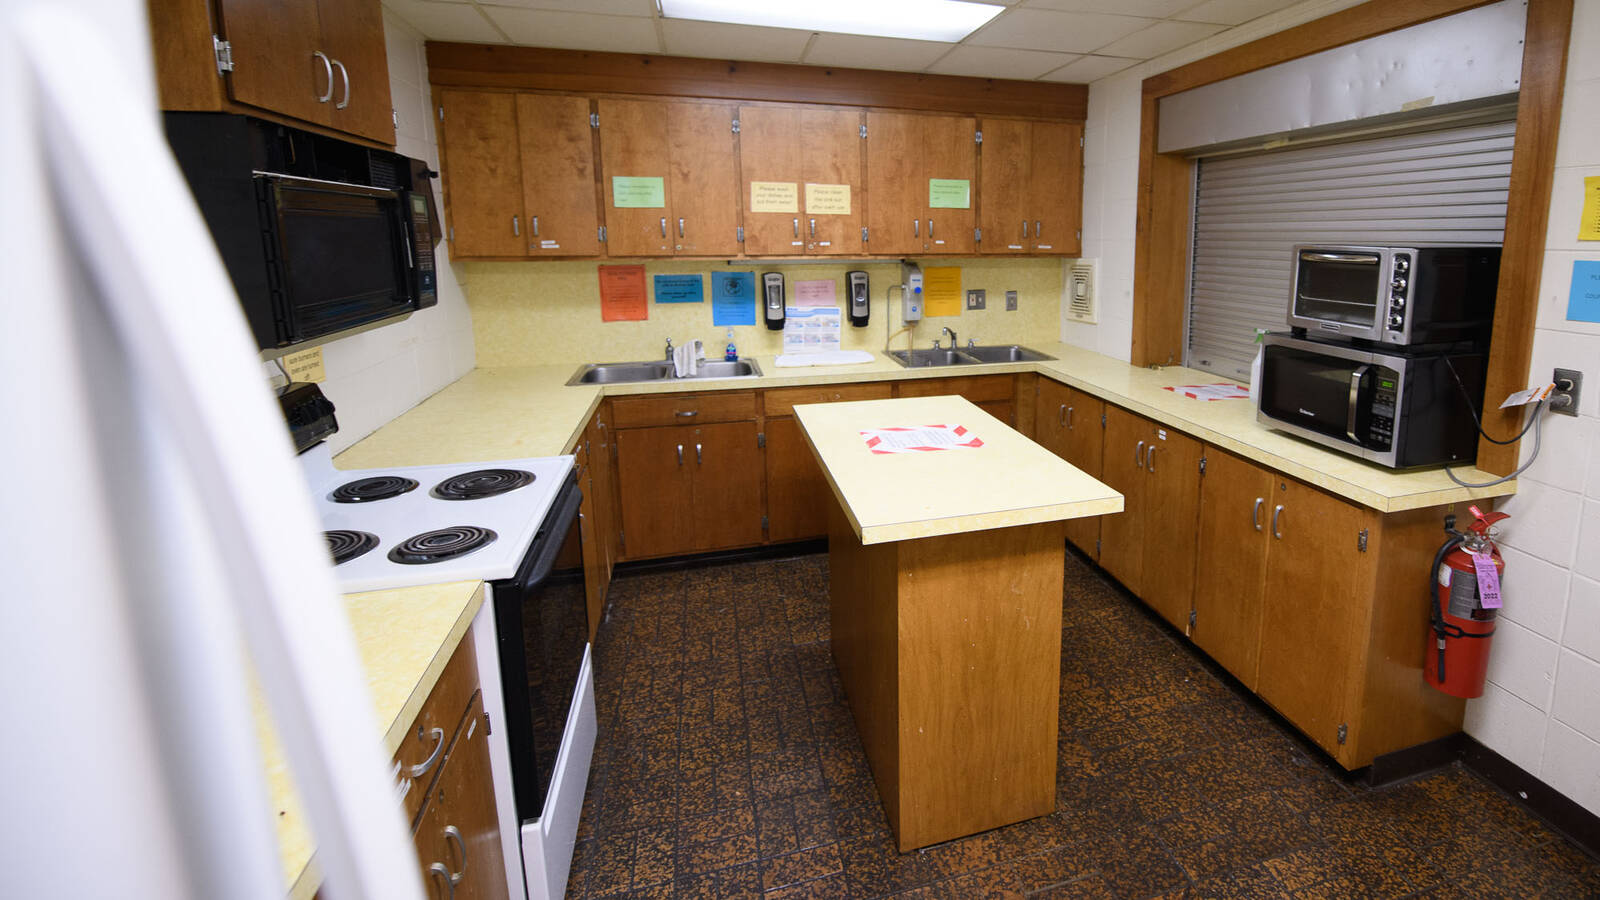 Kitchen space in Governors Hall with a fridge, oven/stove, sinks, microwaves, cabinets, and counter space.